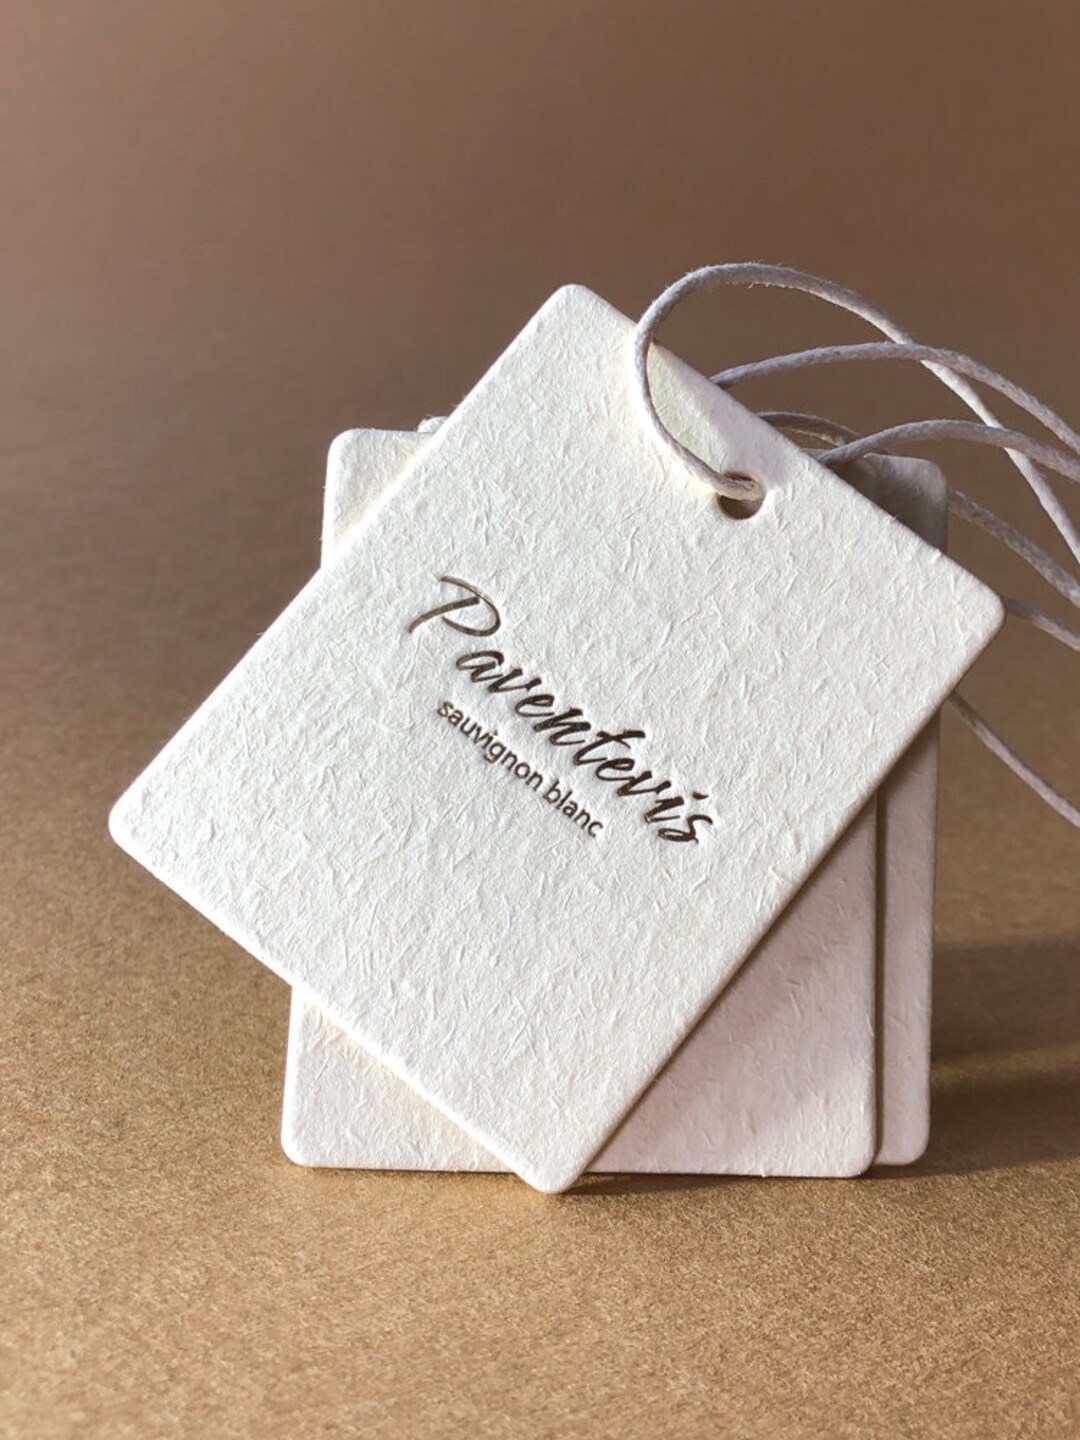 Why are Hang tags Still Important for Businesses?